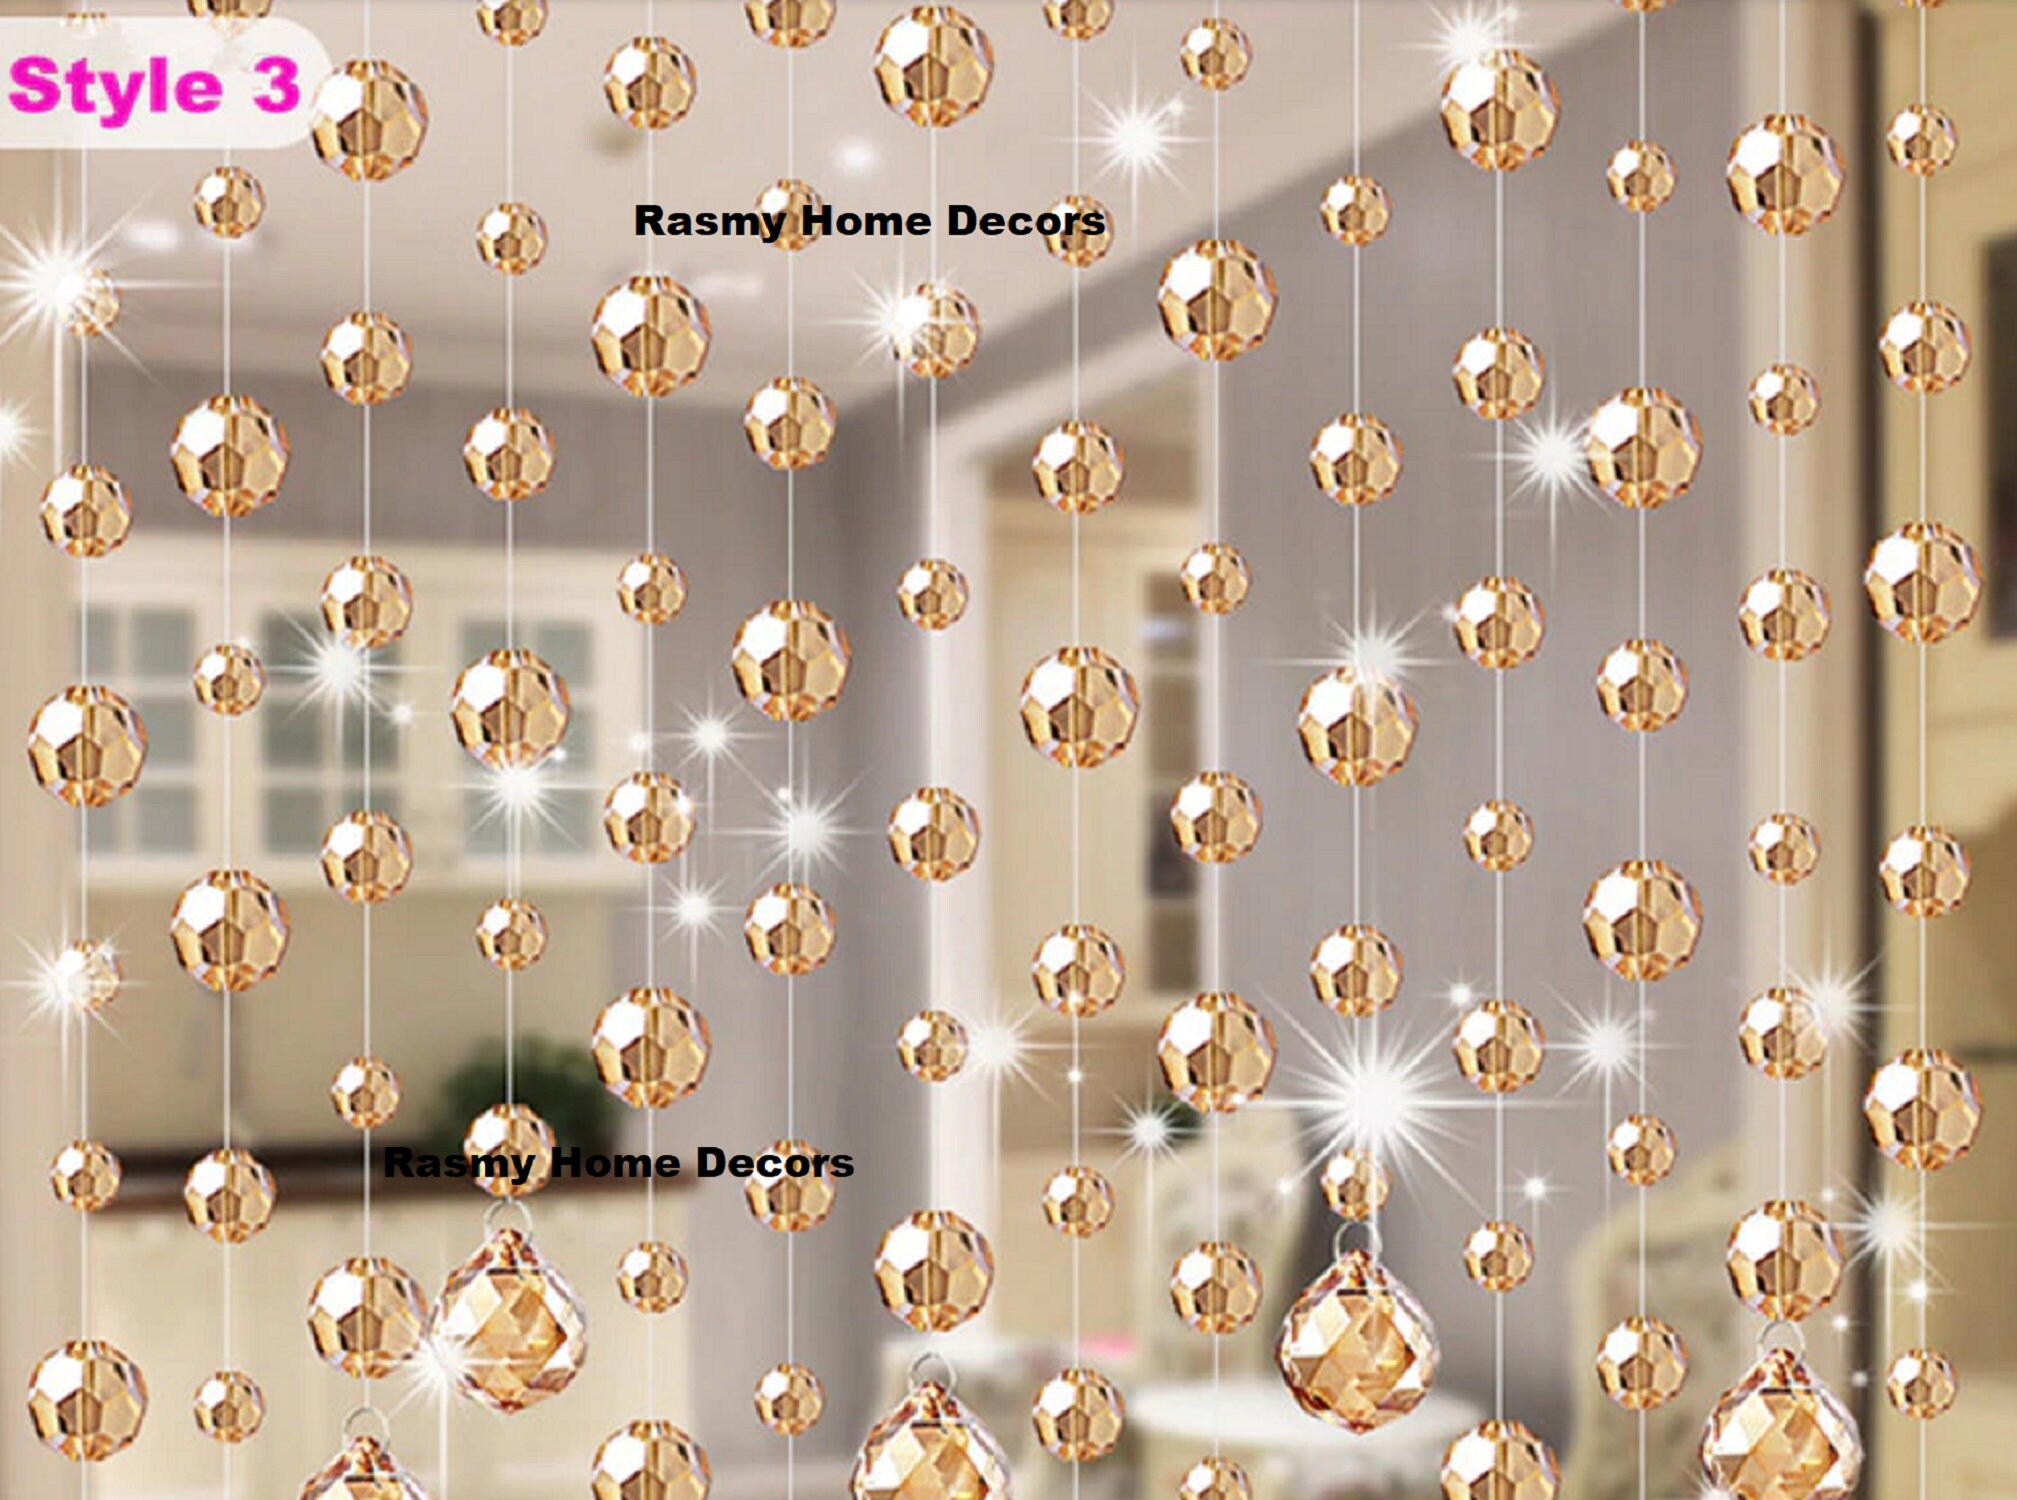 20m/lot, Fashion Crystal Bead Curtain Can Customized Decoration